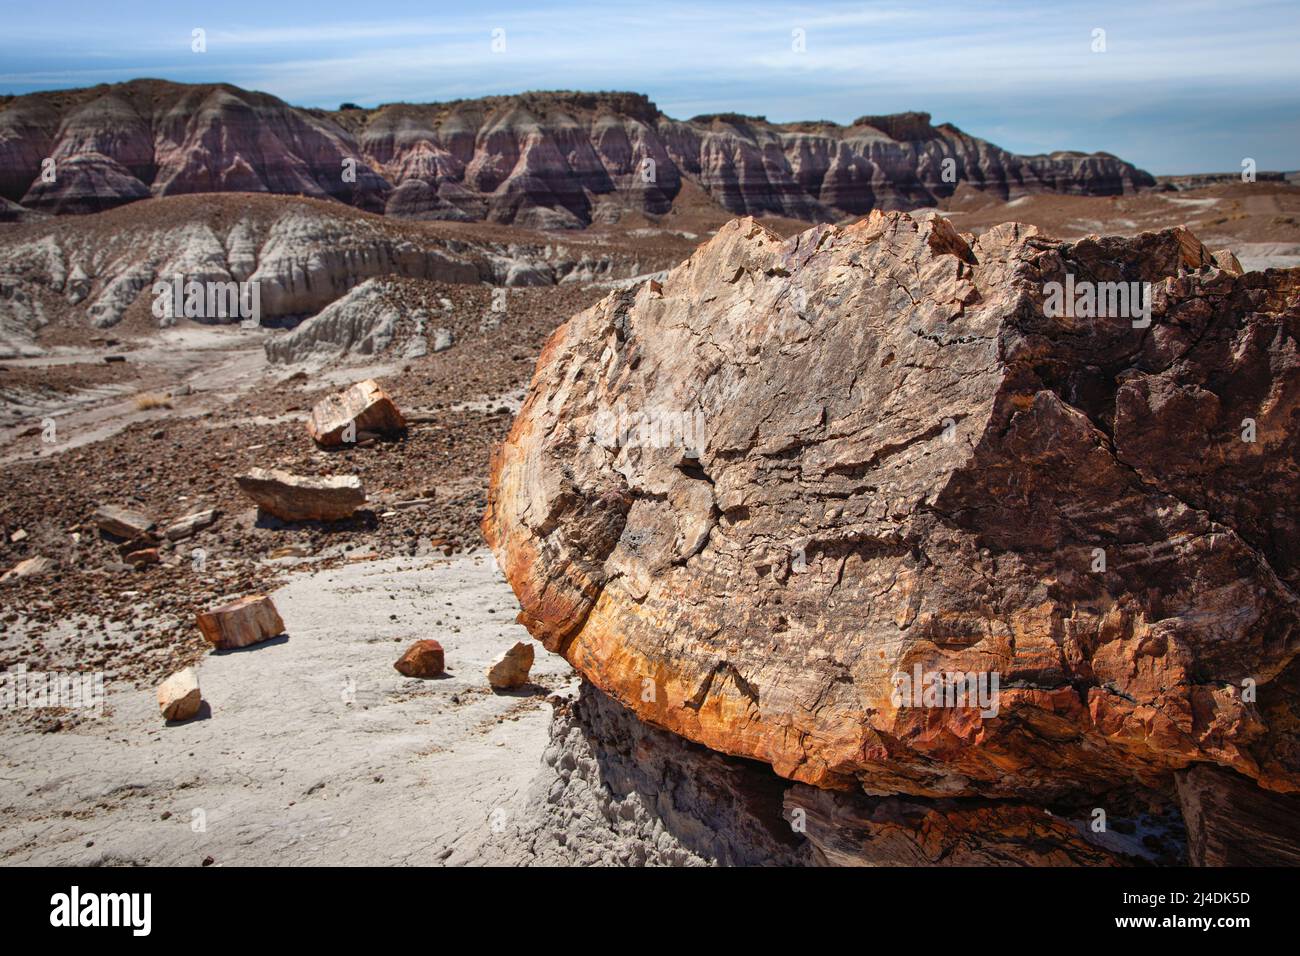 The Blue Mesa, Blue Forest area in Petrified Forest National Park, Arizona reveals many of the petrified trees that litter the park. Stock Photo